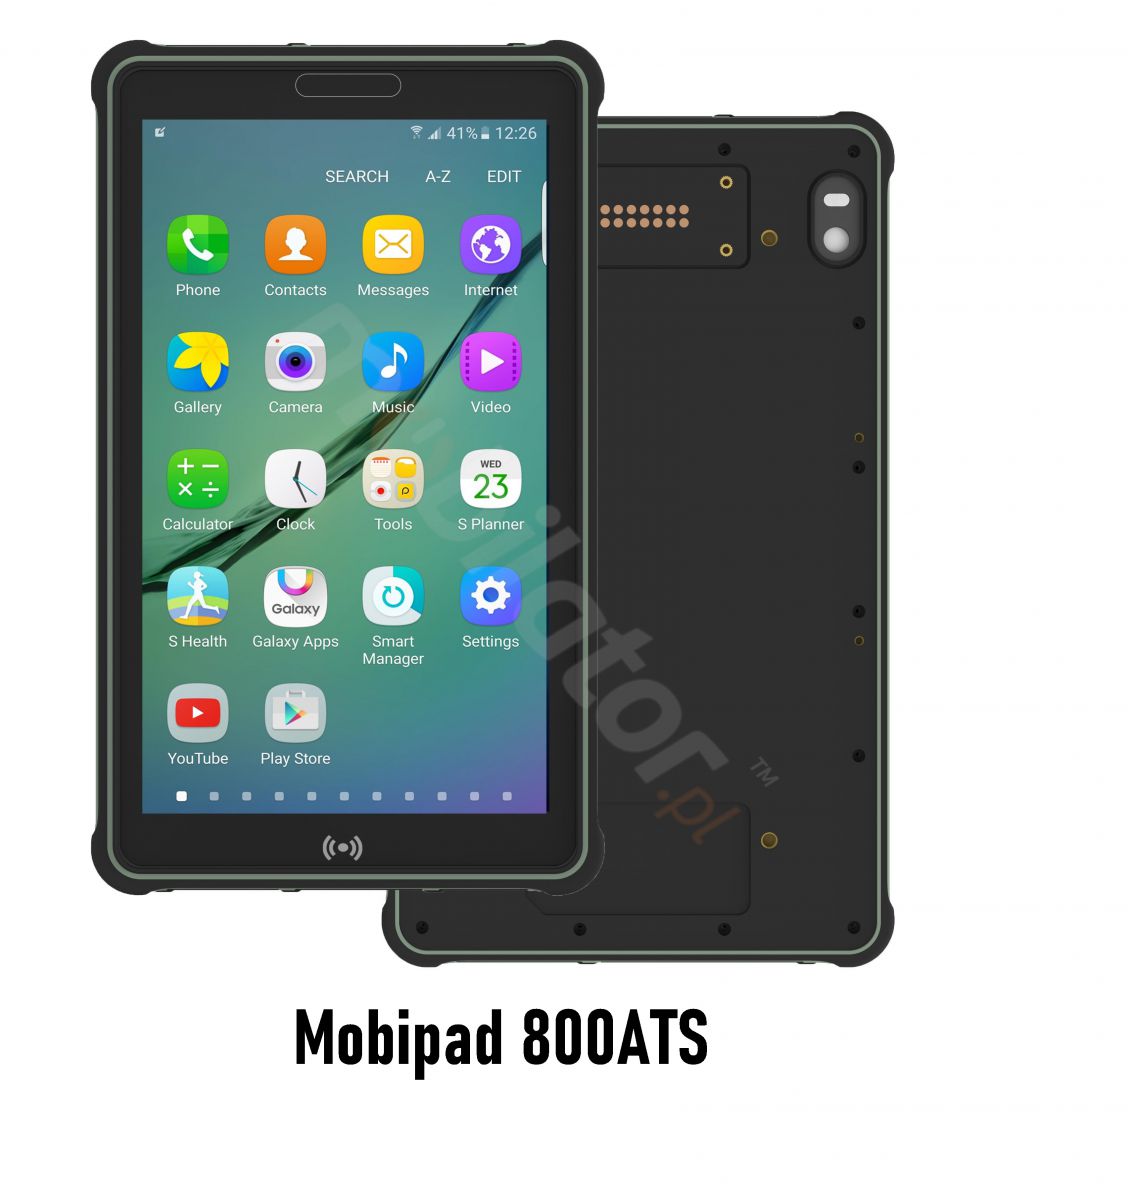 Mobipad 800ATS3 v.2 - Rugged industrial tablet with IP65 and MIL-STD-810G standards, 6GB RAM memory, 128GB disk, Bluetooth 4.0, NFC and EM3296 2D scanner 